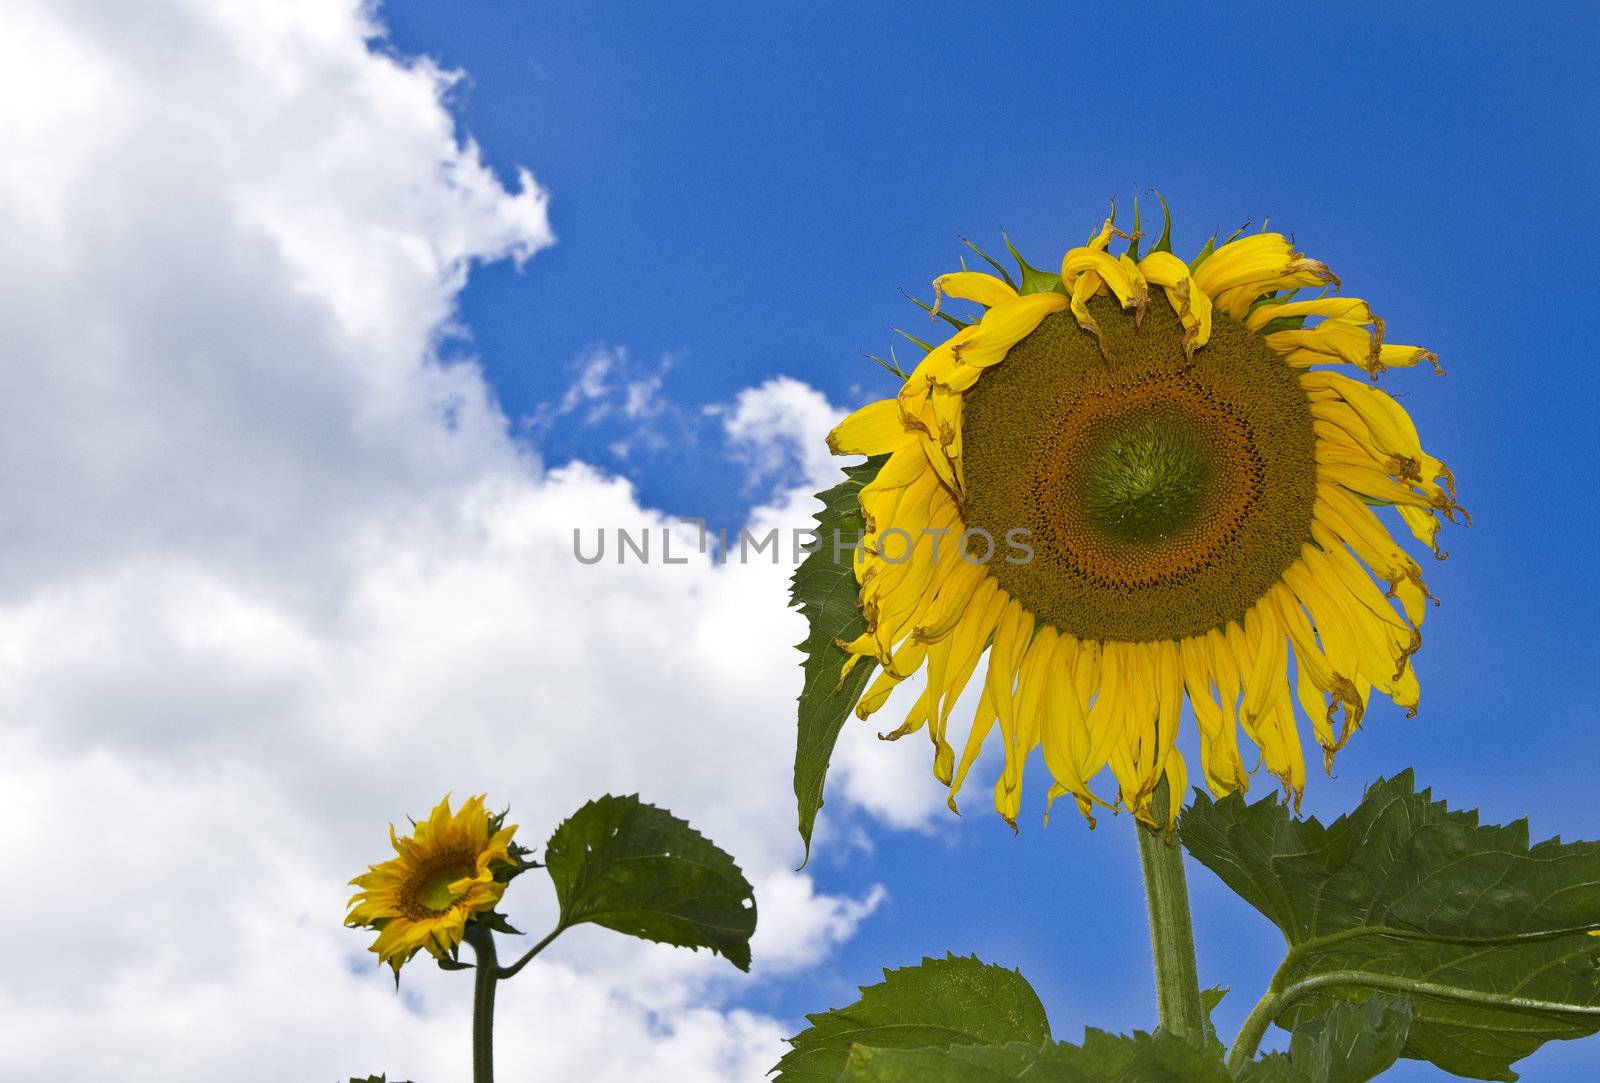 Sunflowers growing on cloudy blue sky background